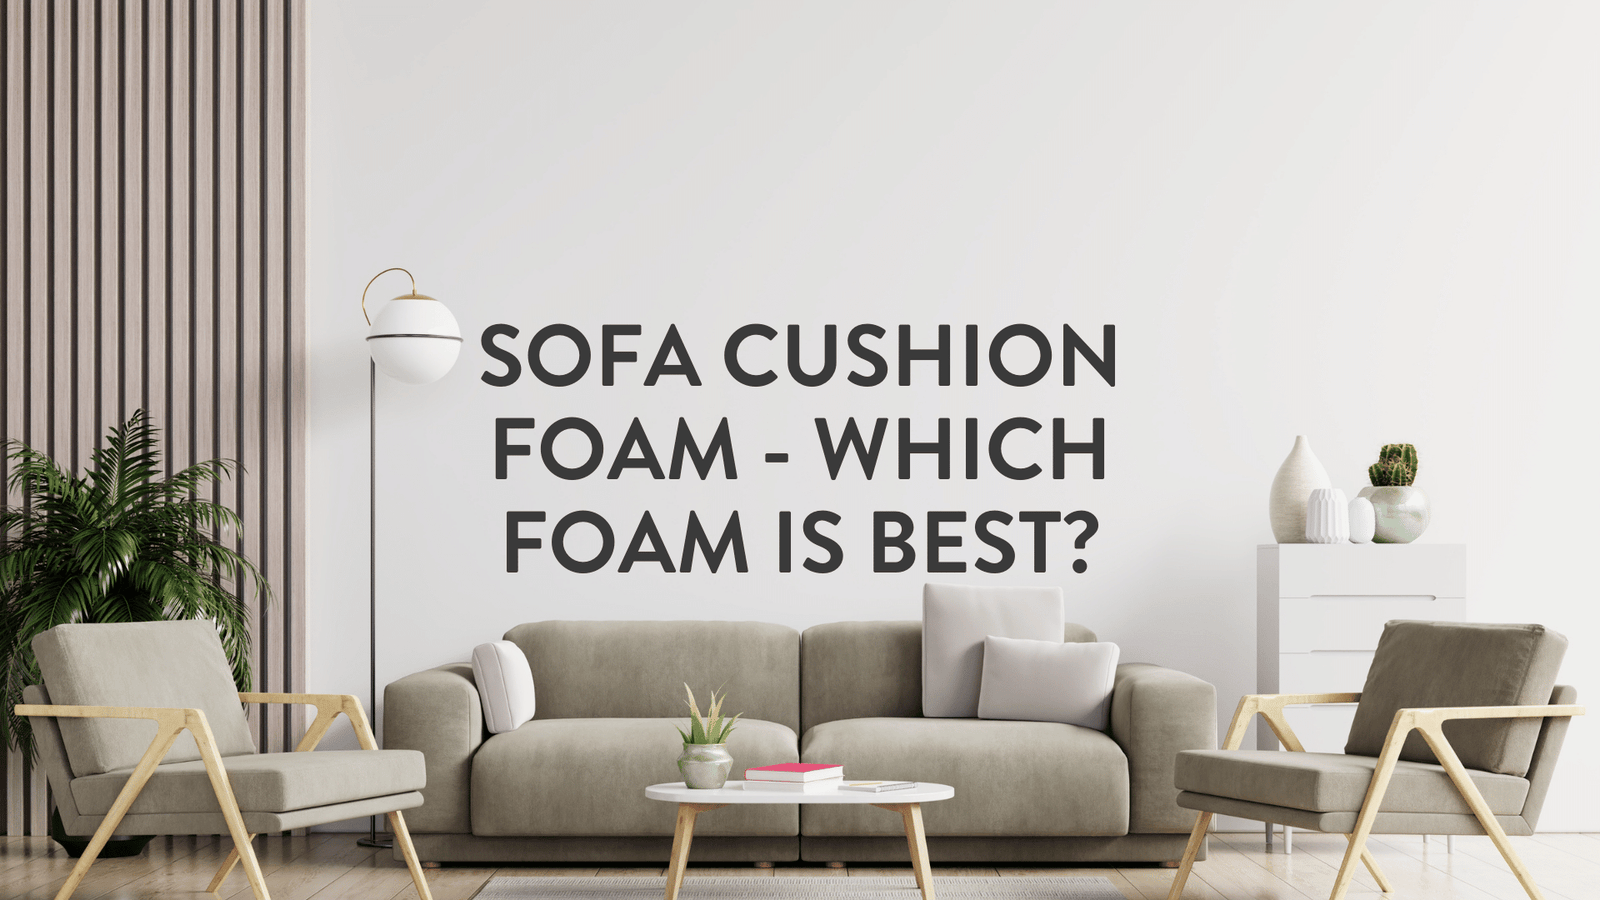 sofa cushion foam - which foam is best? Sofa cushion replacement and refilling service.